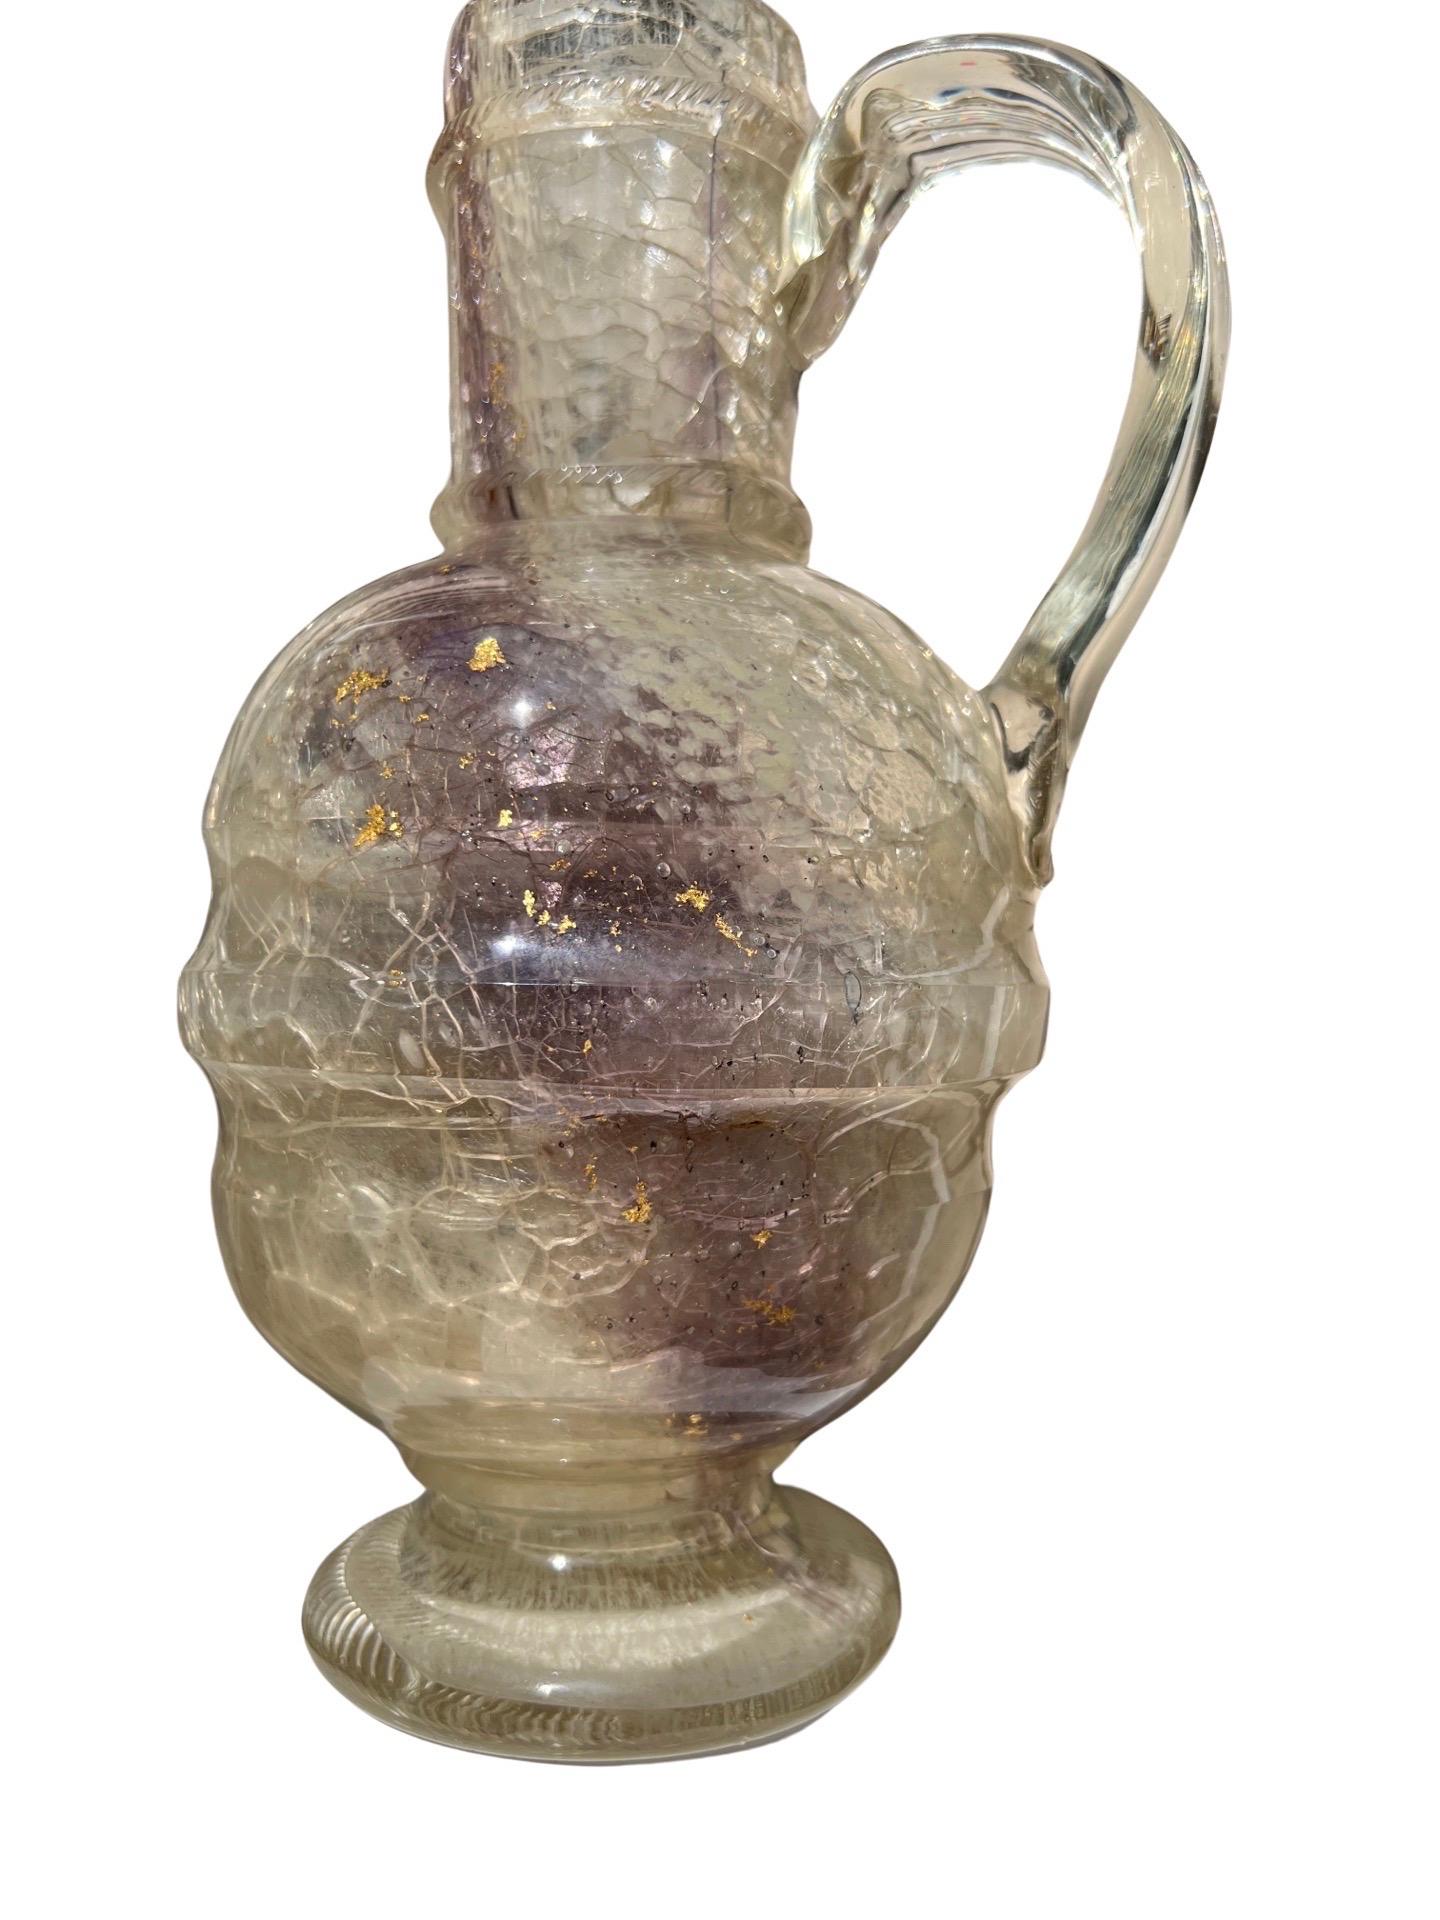 After The Roman Antique - Rock Crystal, Glass & Gold Flecking Grand Tour Pitcher For Sale 6